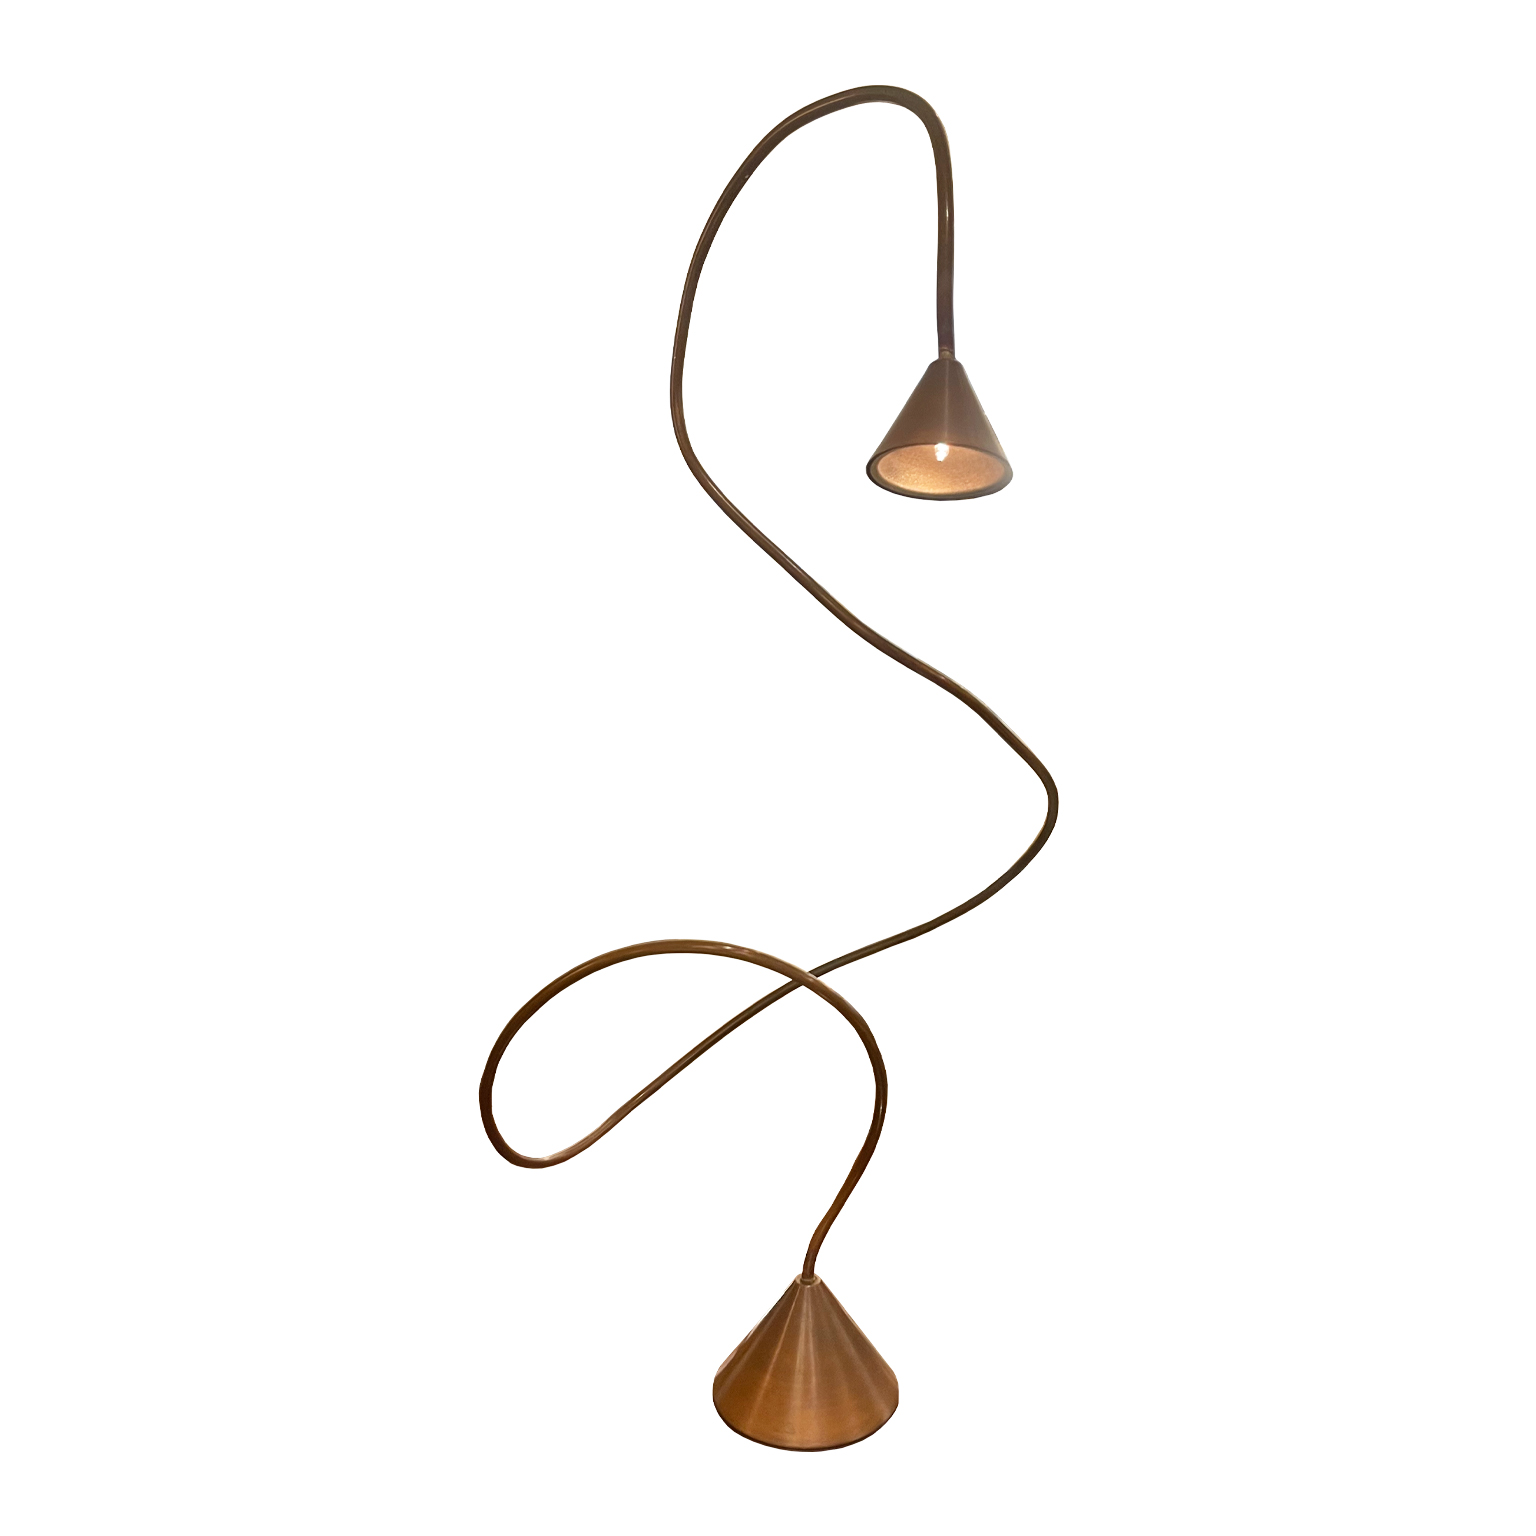 Italian Mid-Century Copper Curved lamp with twisted stem detail and cone shaped base and shade